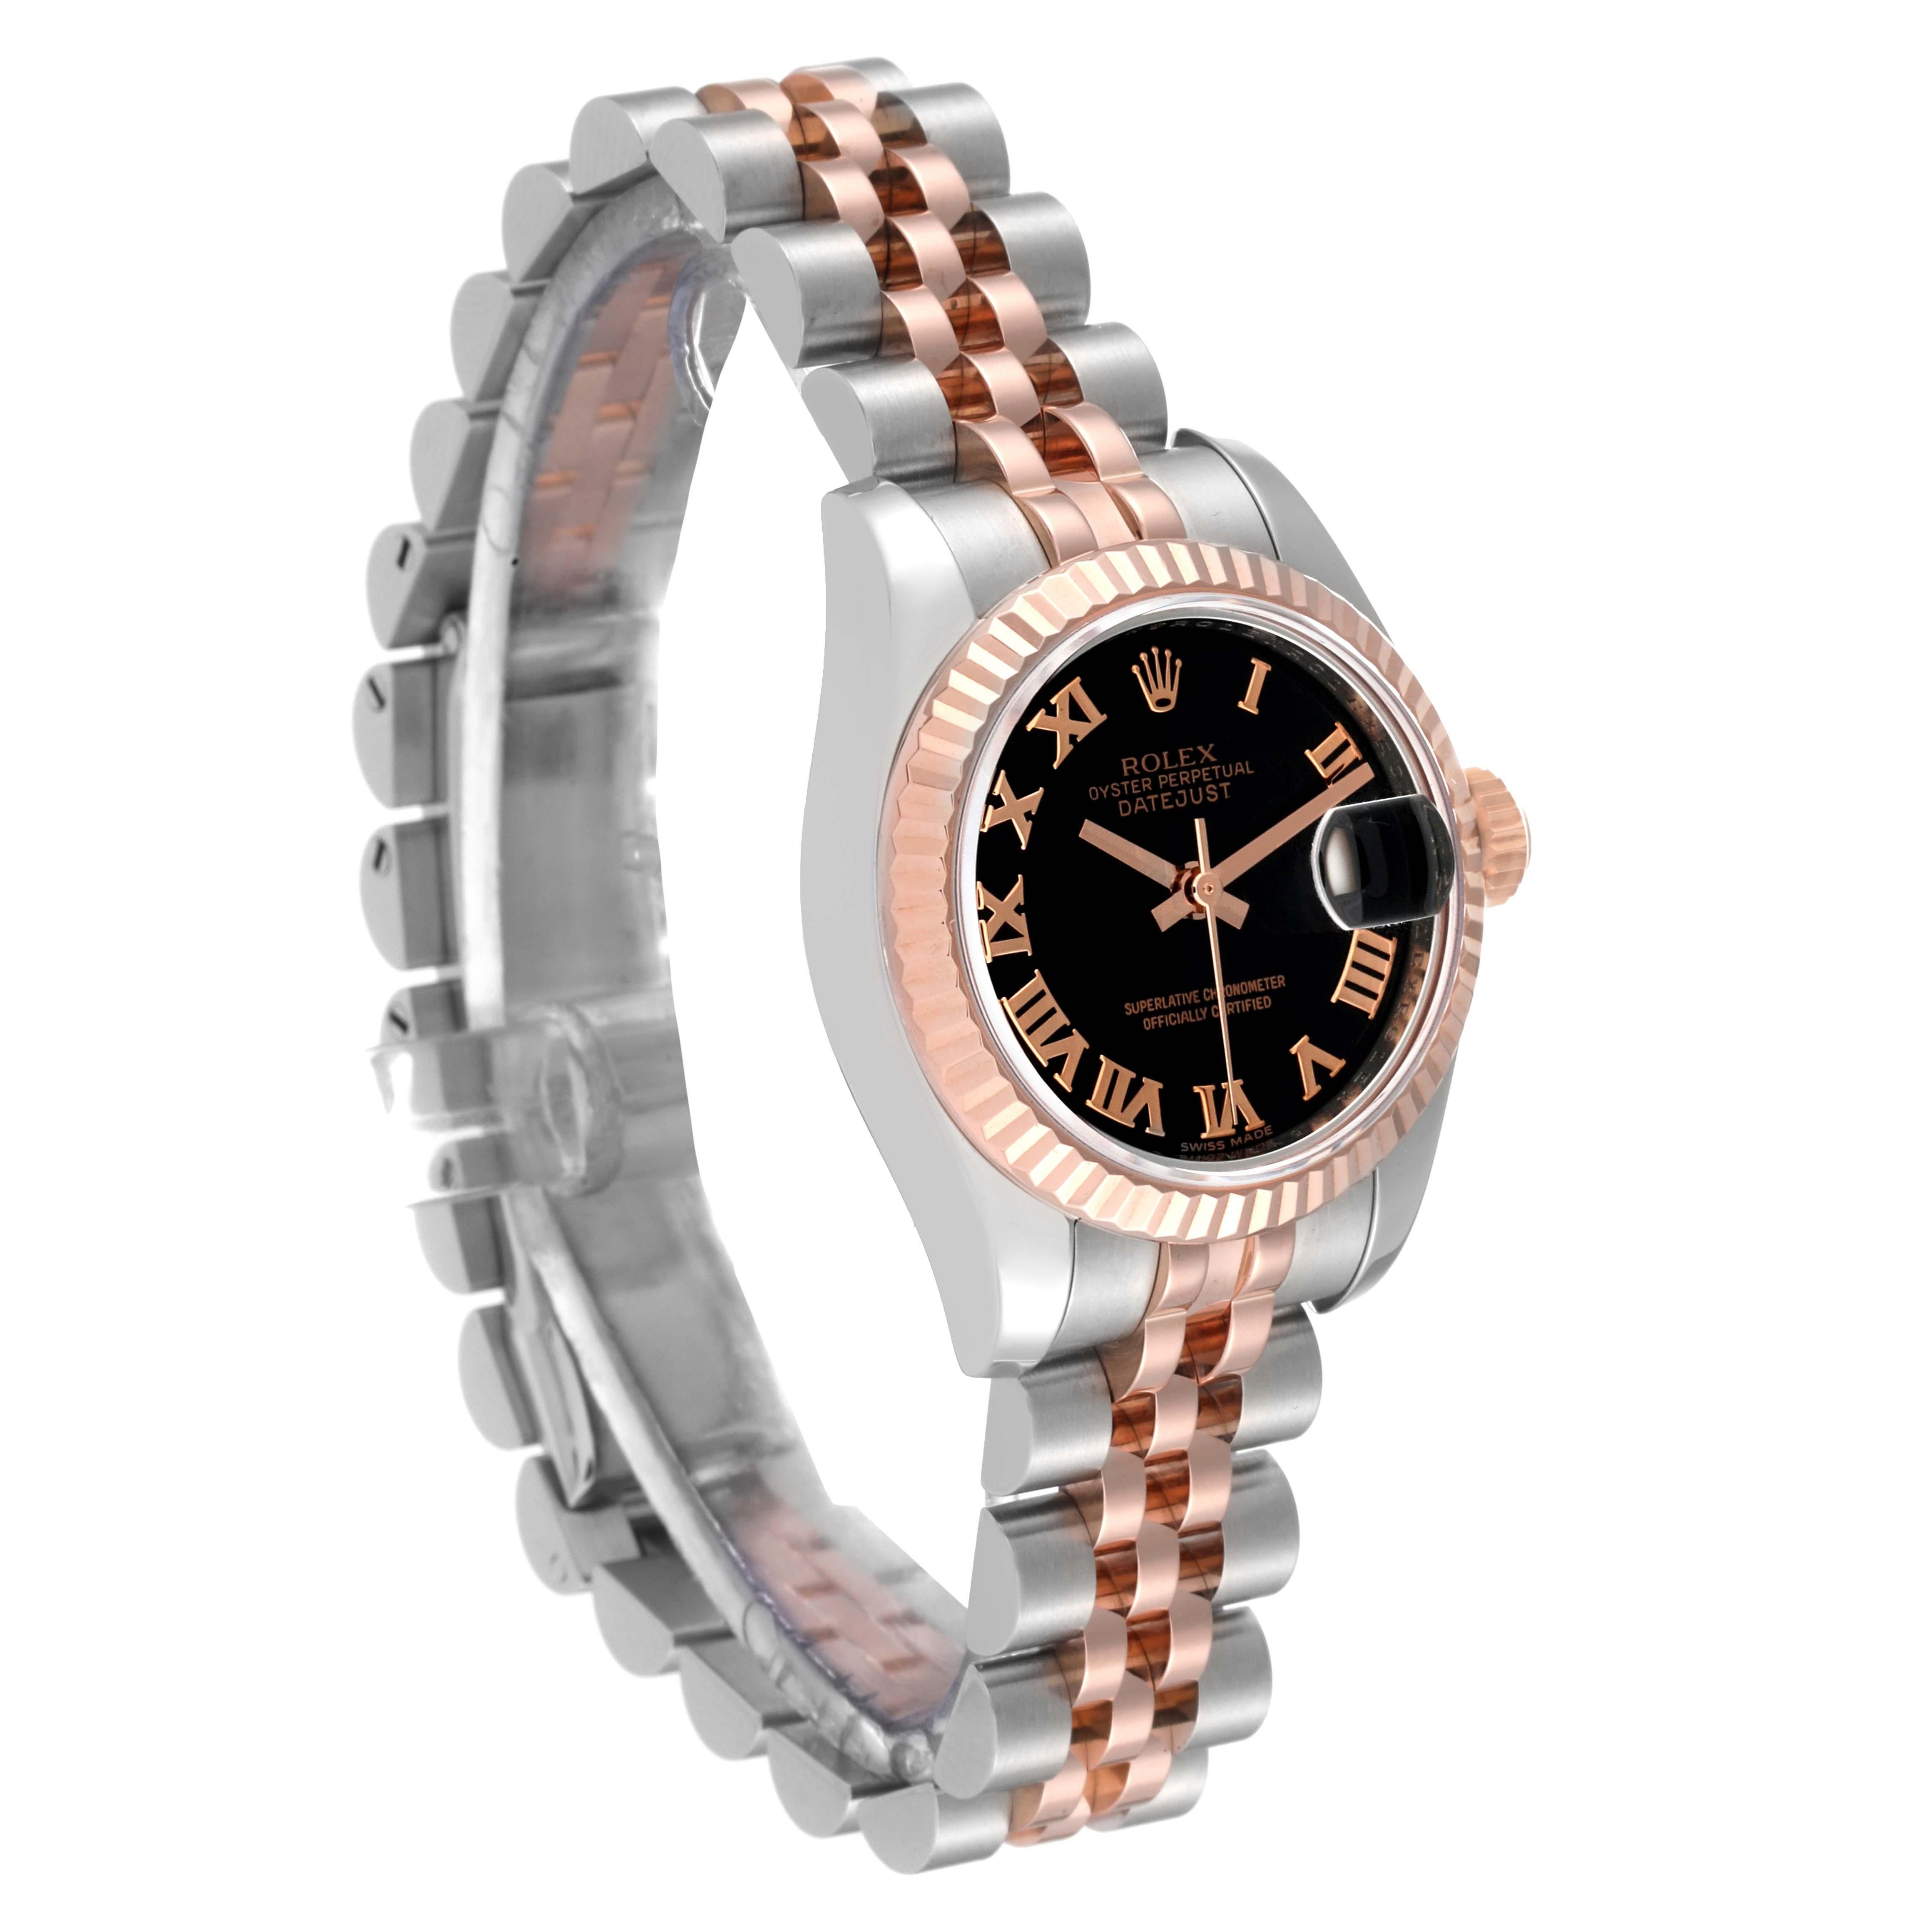 Rolex Datejust Steel Rose Gold Black Dial Ladies Watch 179171 In Excellent Condition For Sale In Atlanta, GA